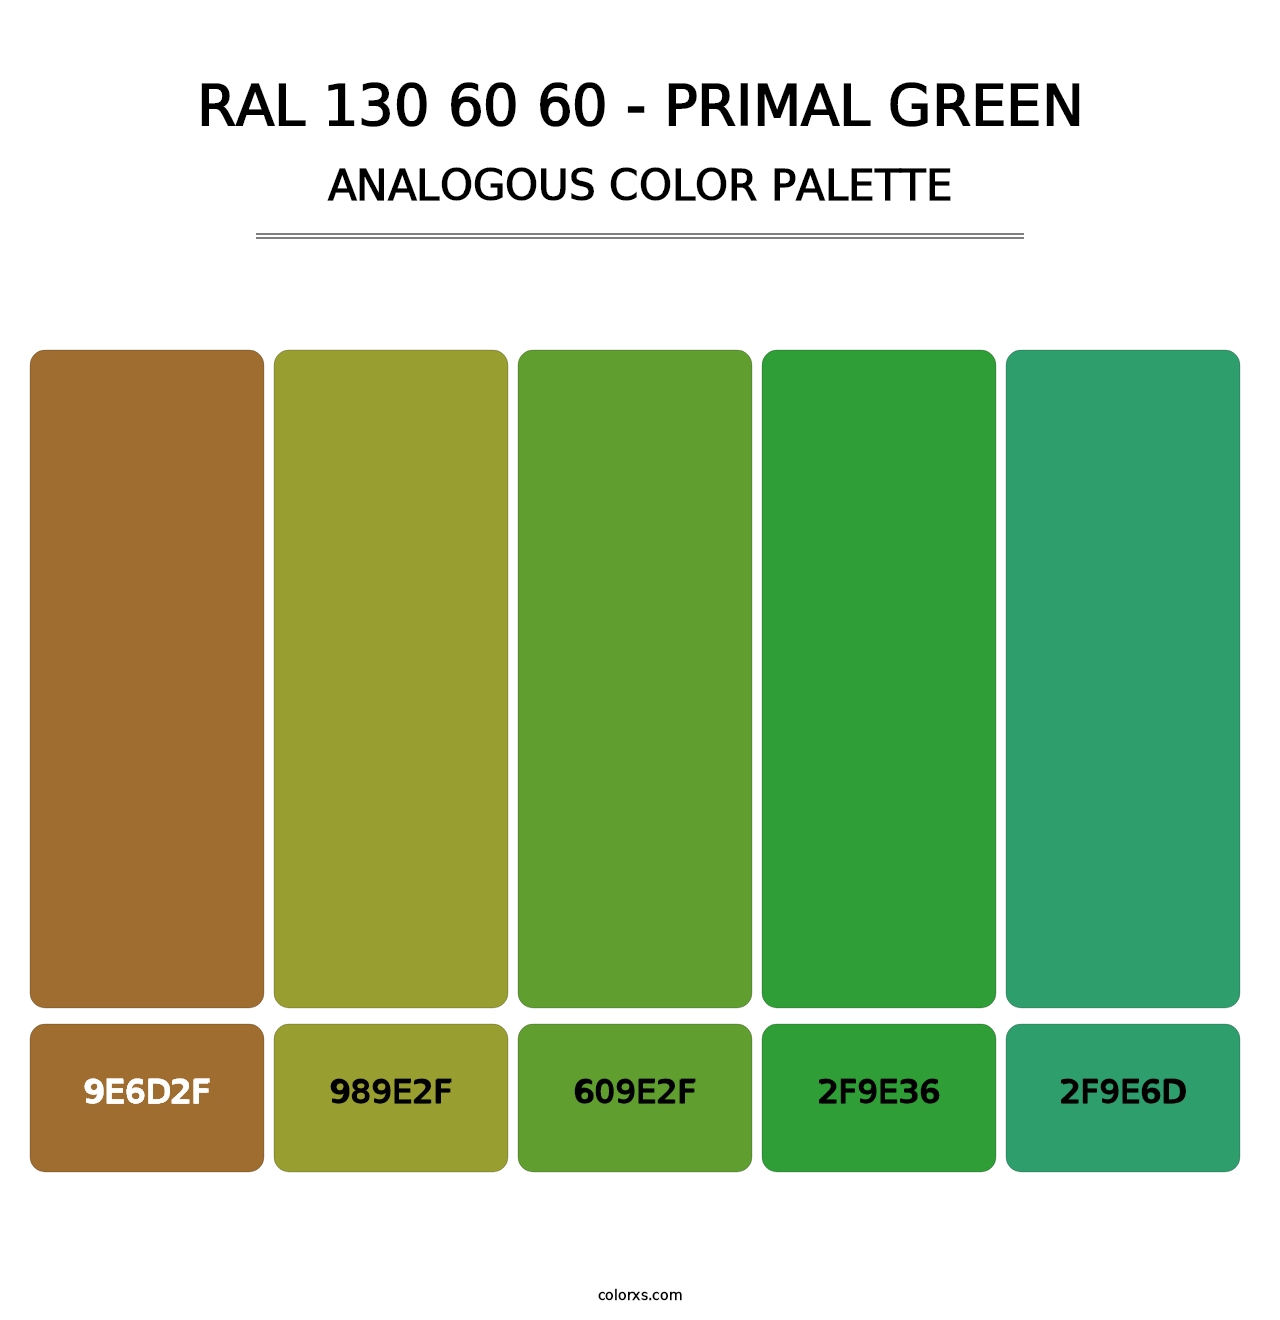 RAL 130 60 60 - Primal Green - Analogous Color Palette